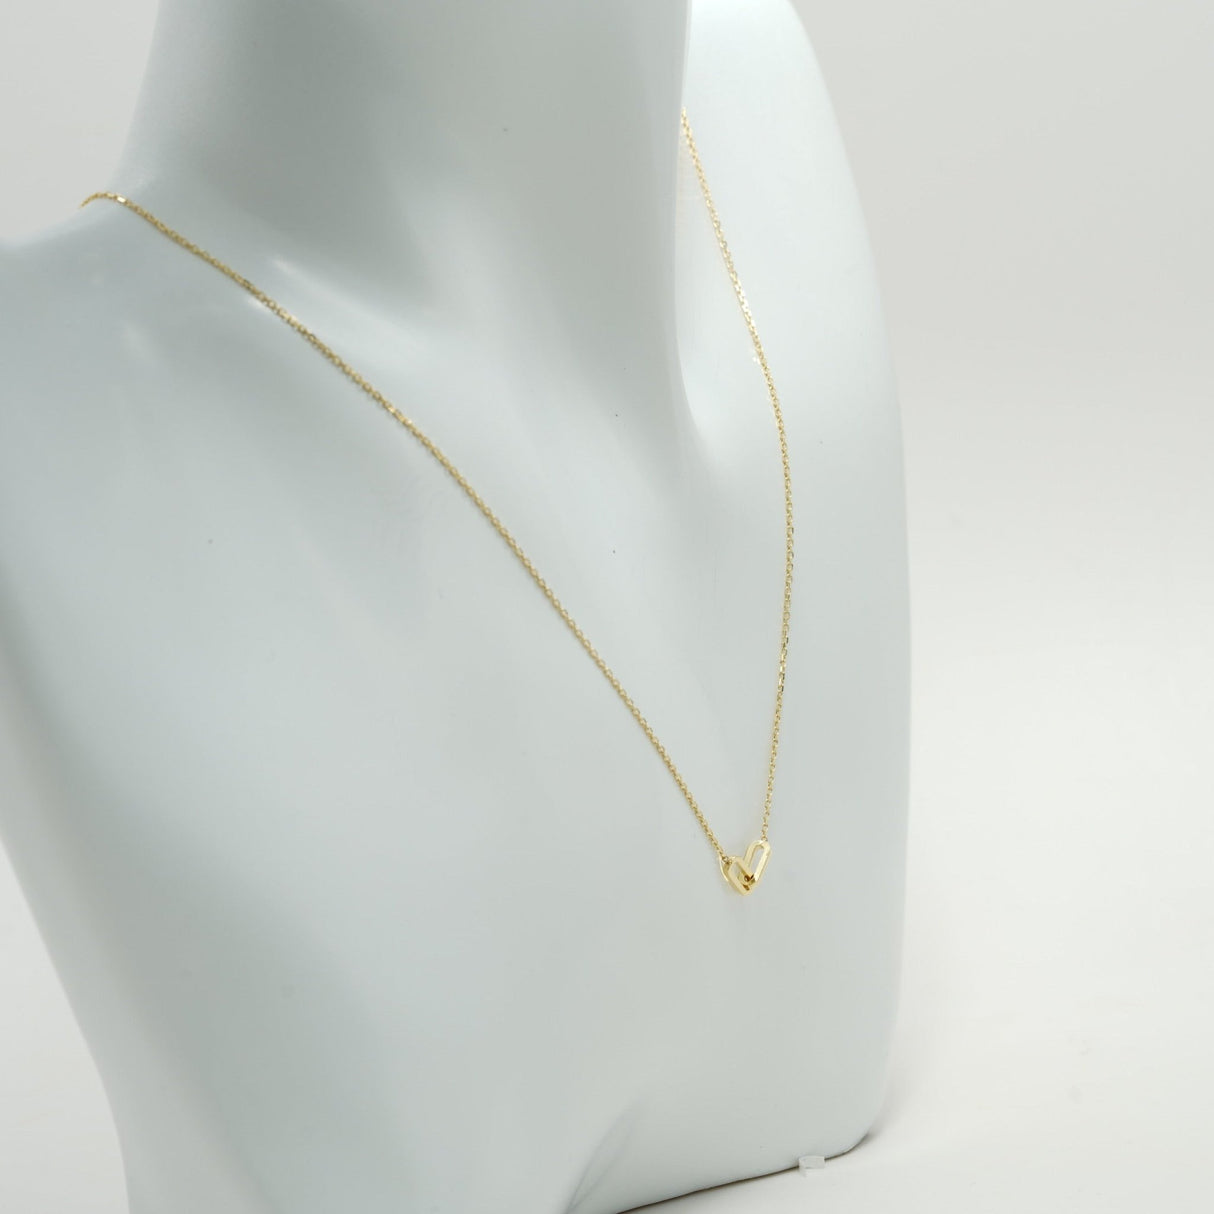 14K Gold Necklace, Adjustabla Double Paper Clip Necklace, Fashion and Trendy Necklace,  Wear something special with the 14K Gold Necklace from Diamond Origin. This adjustable paper clip necklace is perfect for any occasion and its fashionable and trendy design will make sure you stand out from the crowd. Not to mention its elegant look and stackable design! Get it now and experience true luxury.  Elegant and fashionable stackable gold necklace, trendy gold necklace for all occasions gift,